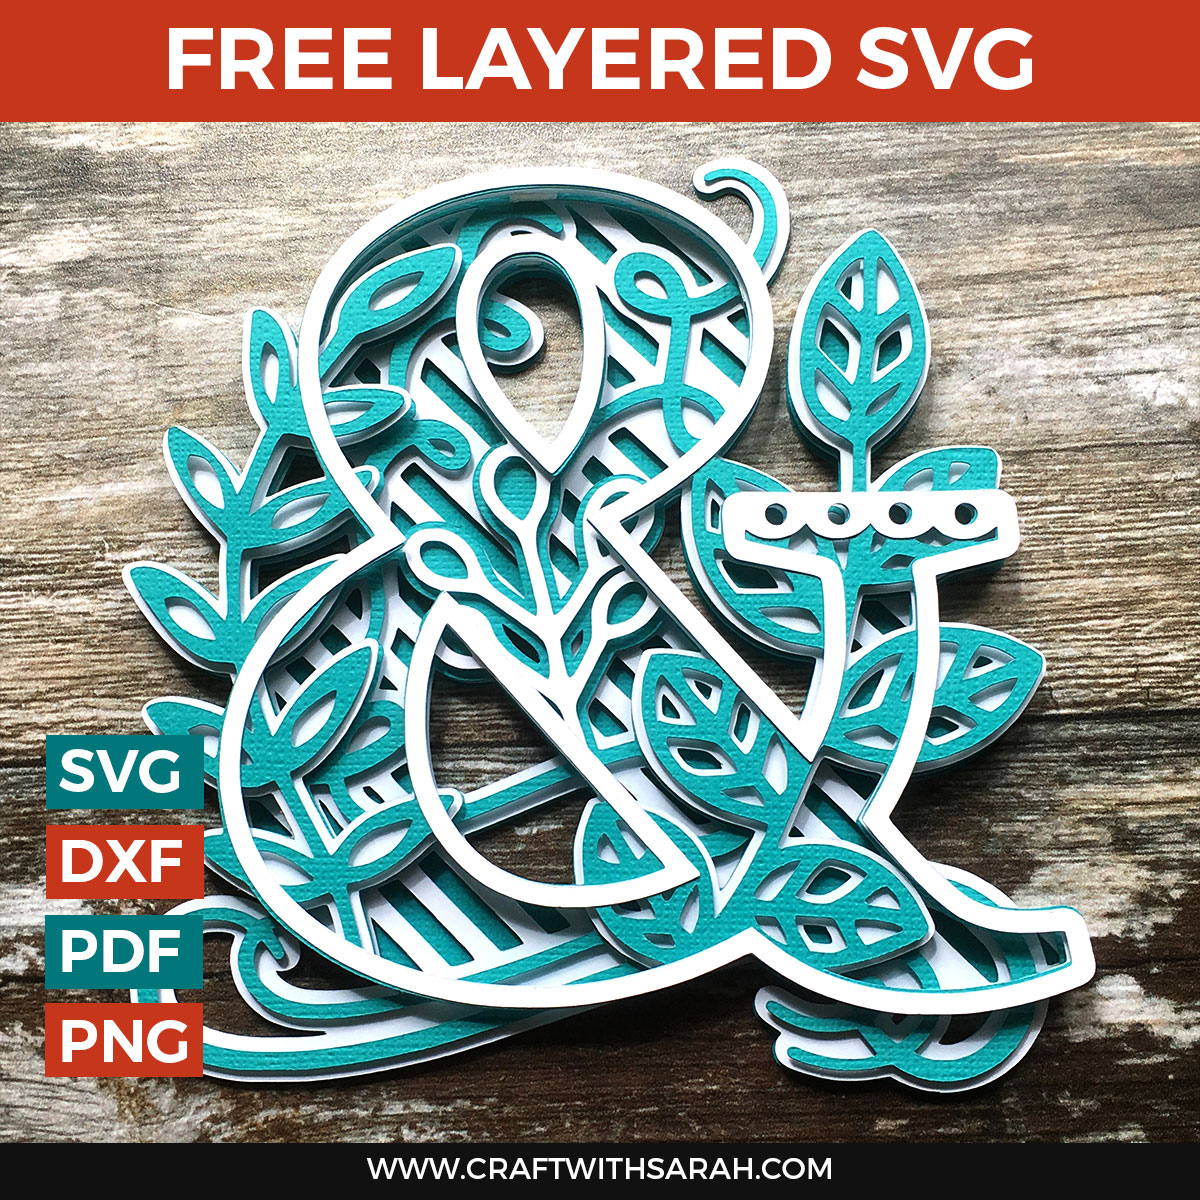 Download Ampersand Layered Svg Craft With Sarah